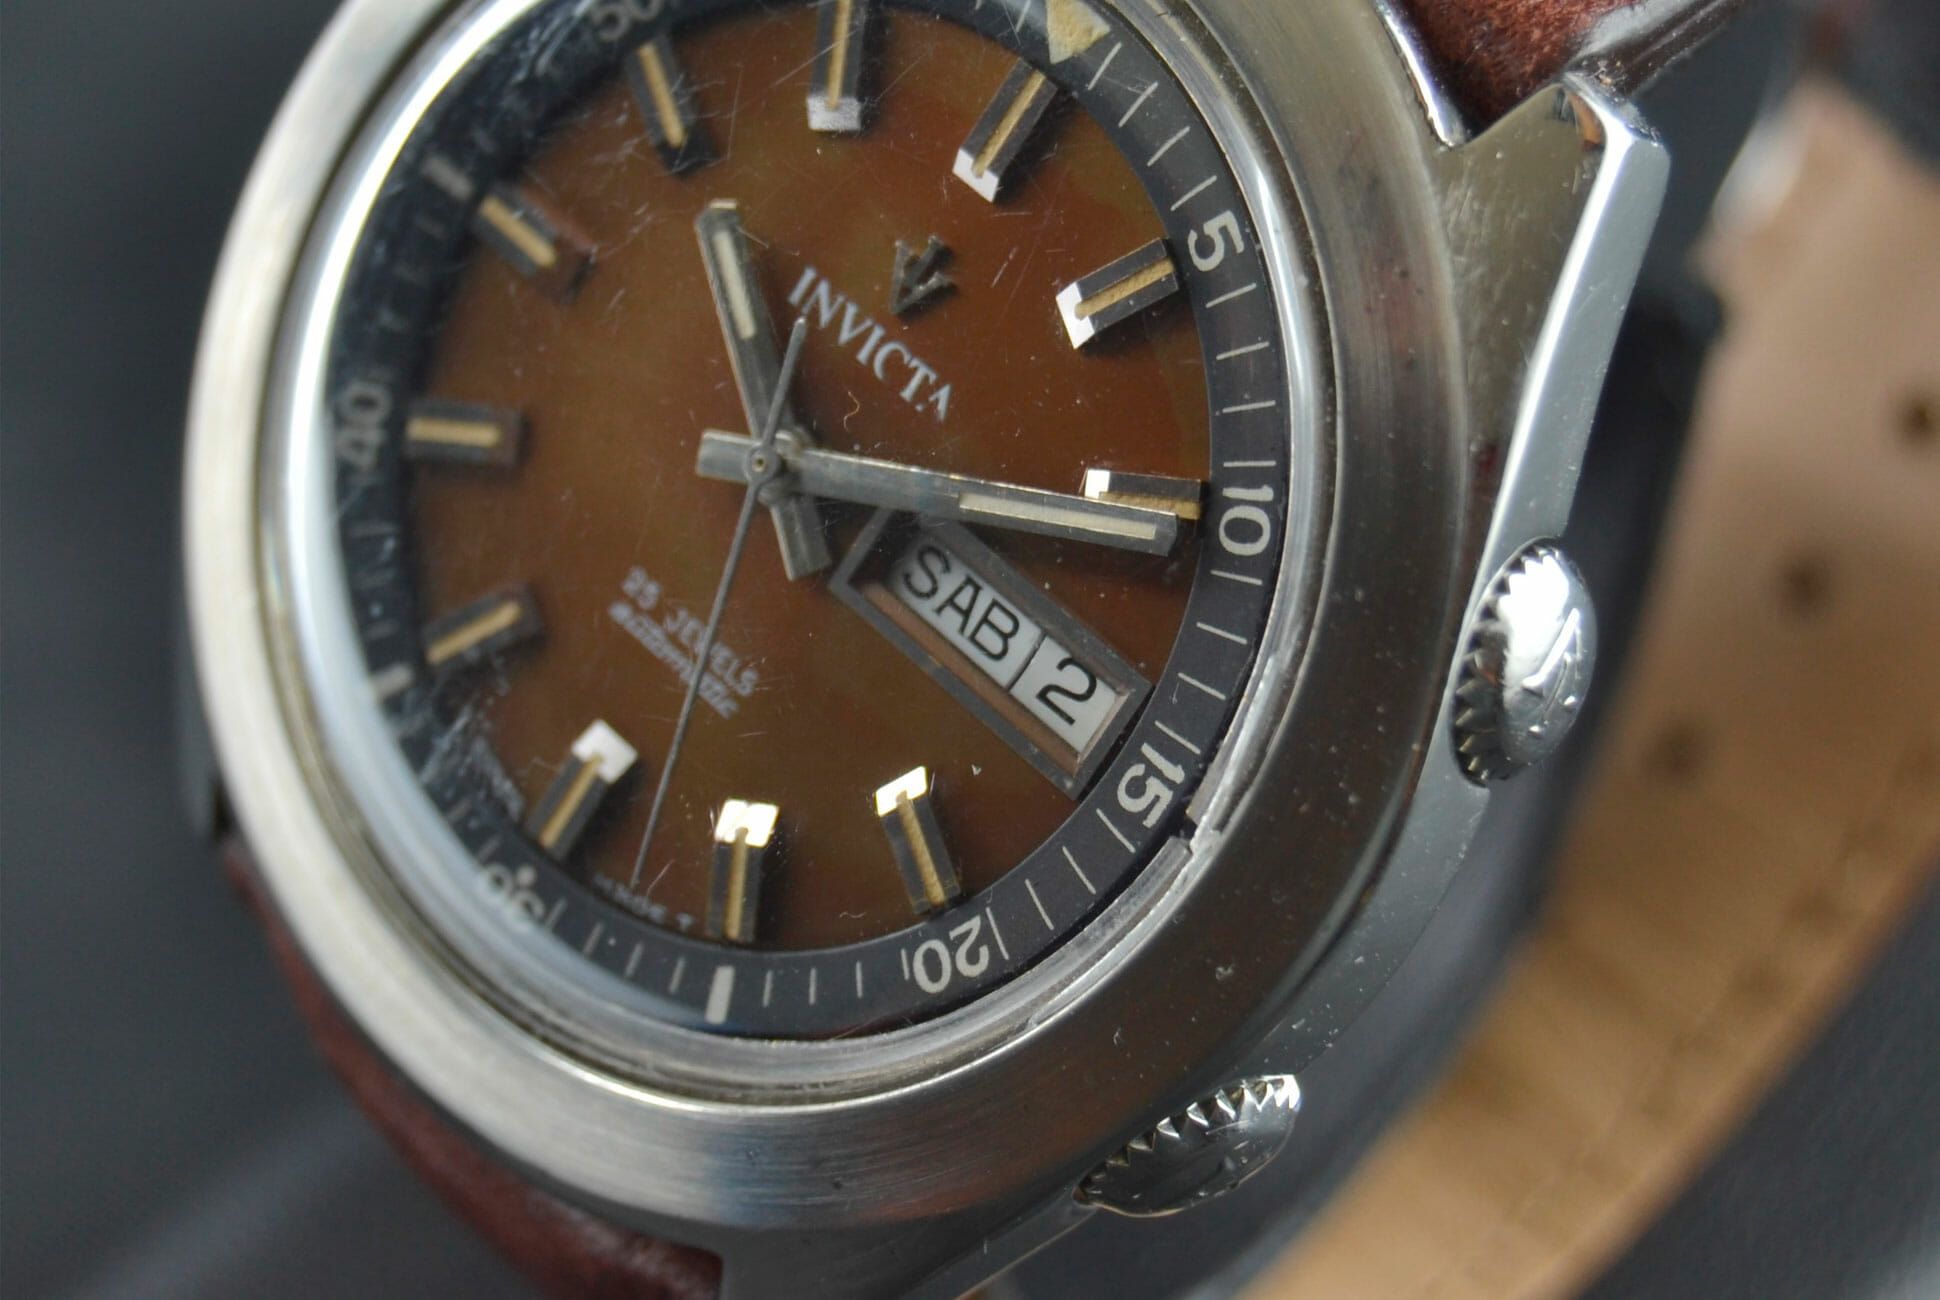 These Vintage Invicta Watches Show the Brand's Forgotten History